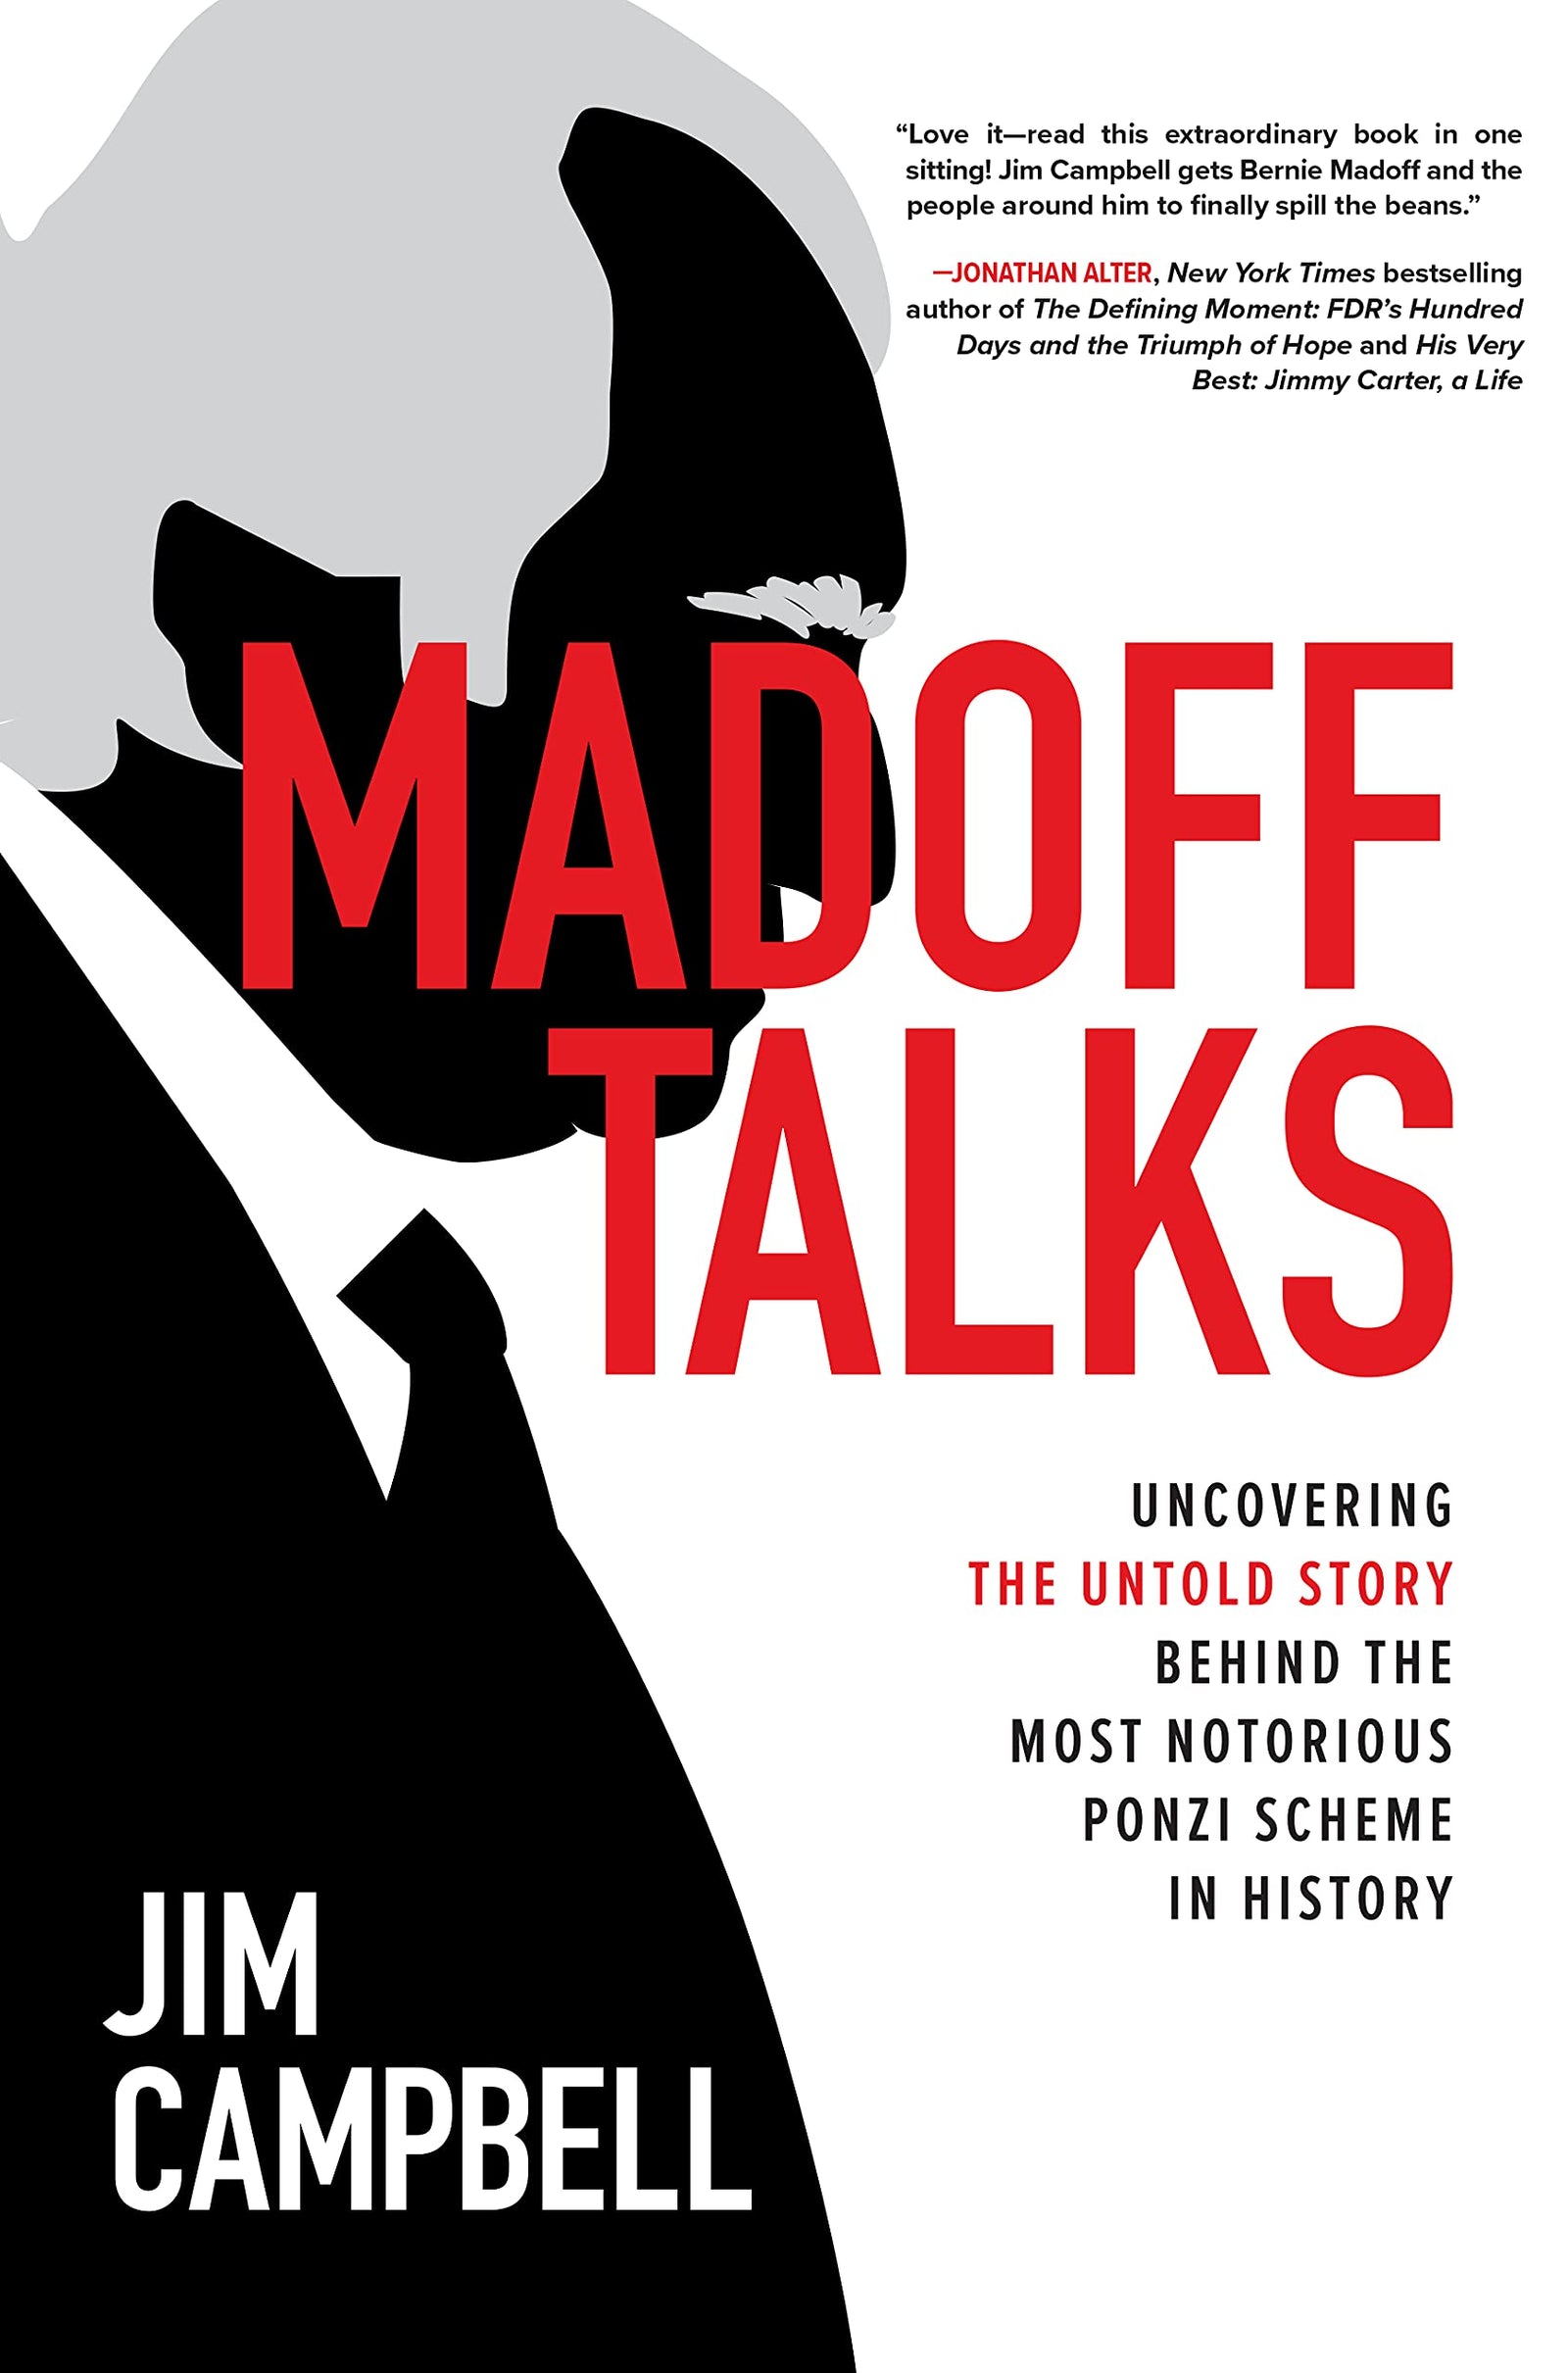 Madoff Talks: Uncovering the Untold Story Behind the Most Notorious Ponzi Scheme in History